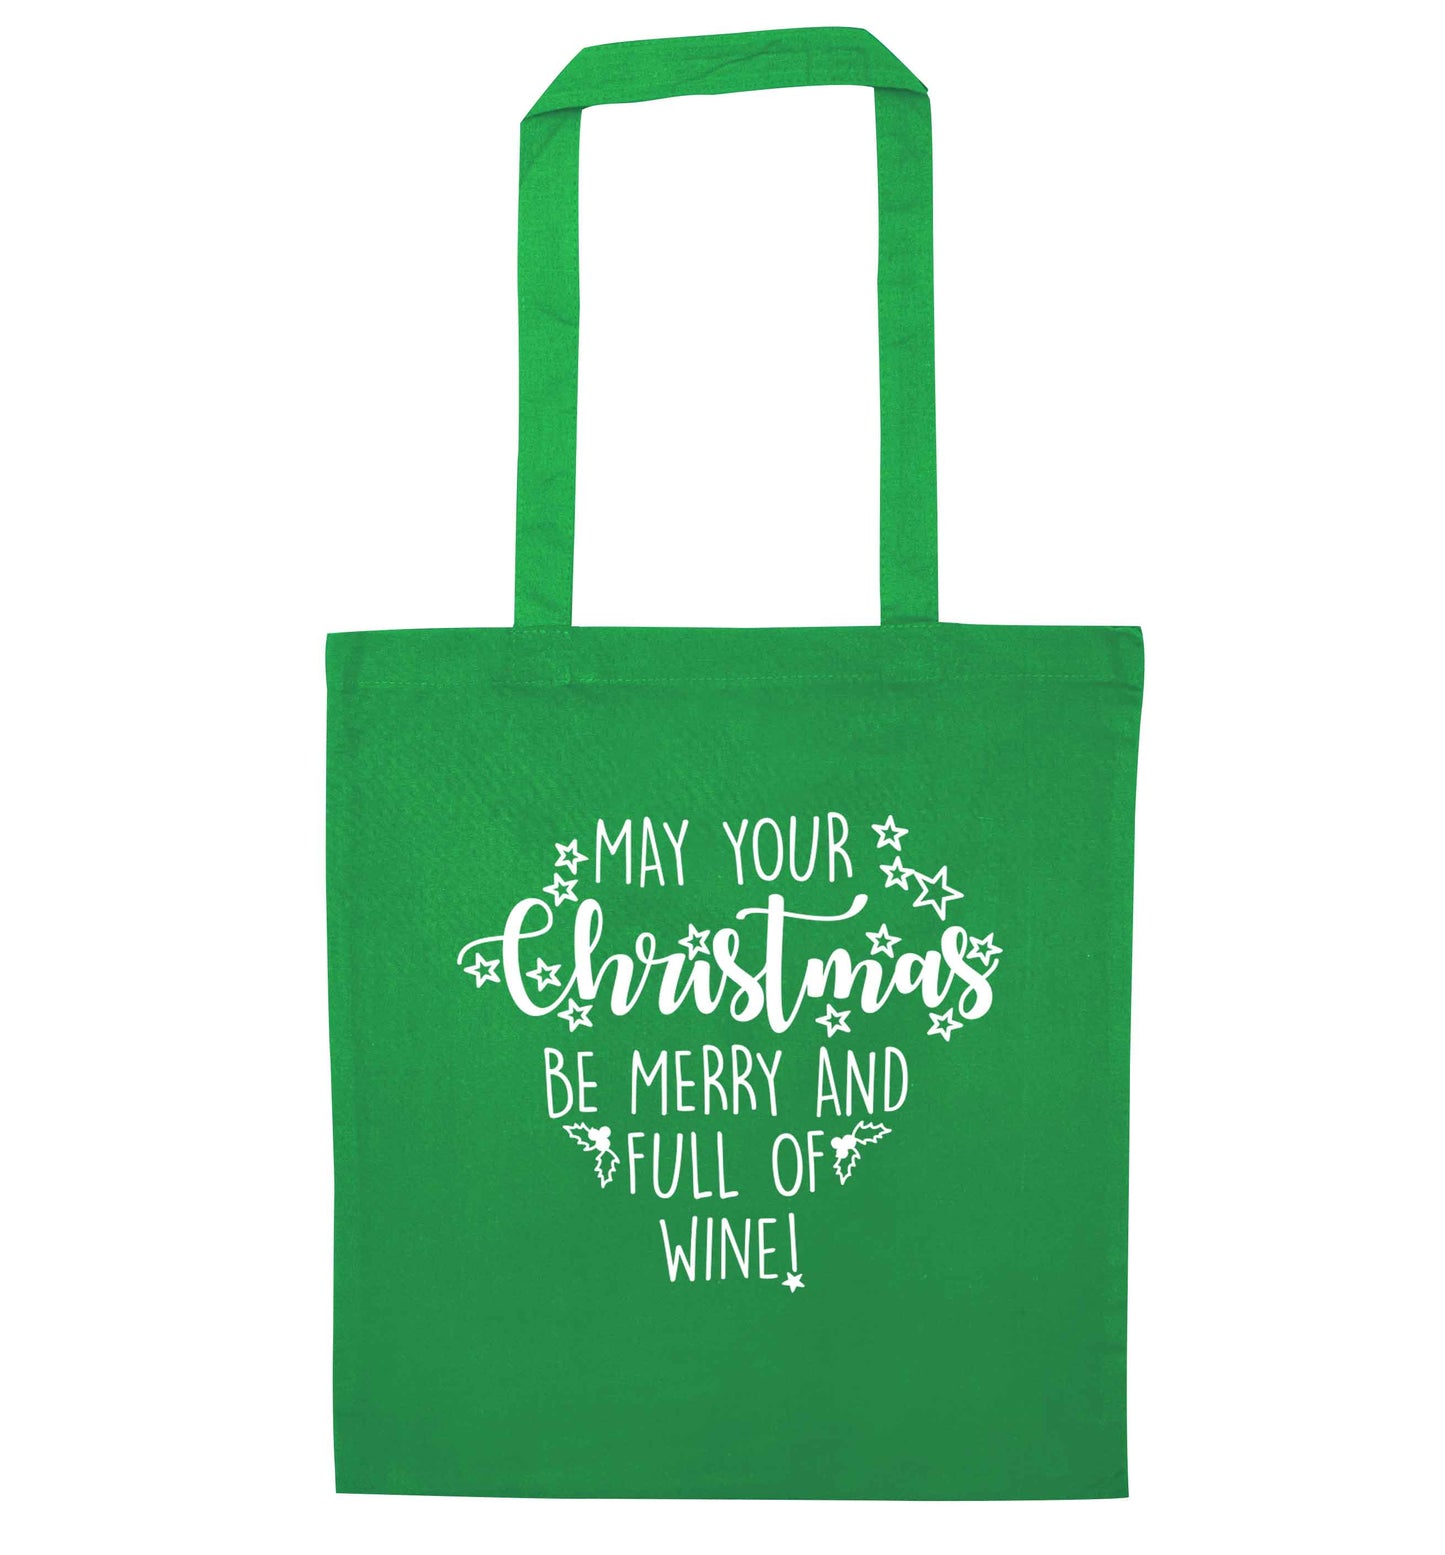 May your Christmas be merry and full of wine green tote bag